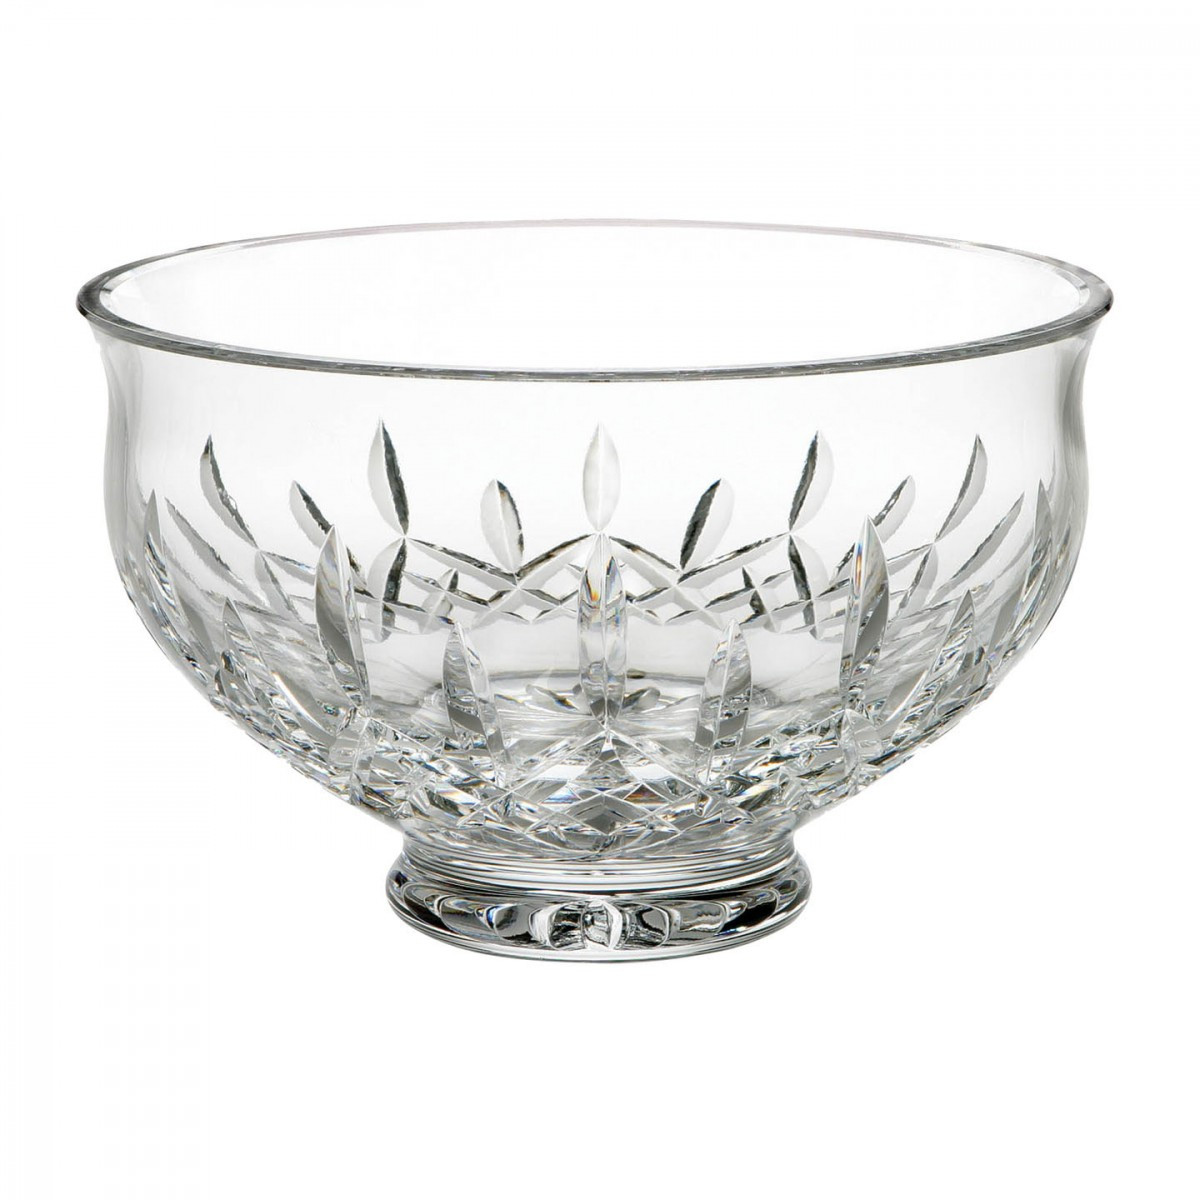 waterford lismore diamond 8 vase of lismore 10in footed bowl waterford us with regard to lismore 10in footed bowl